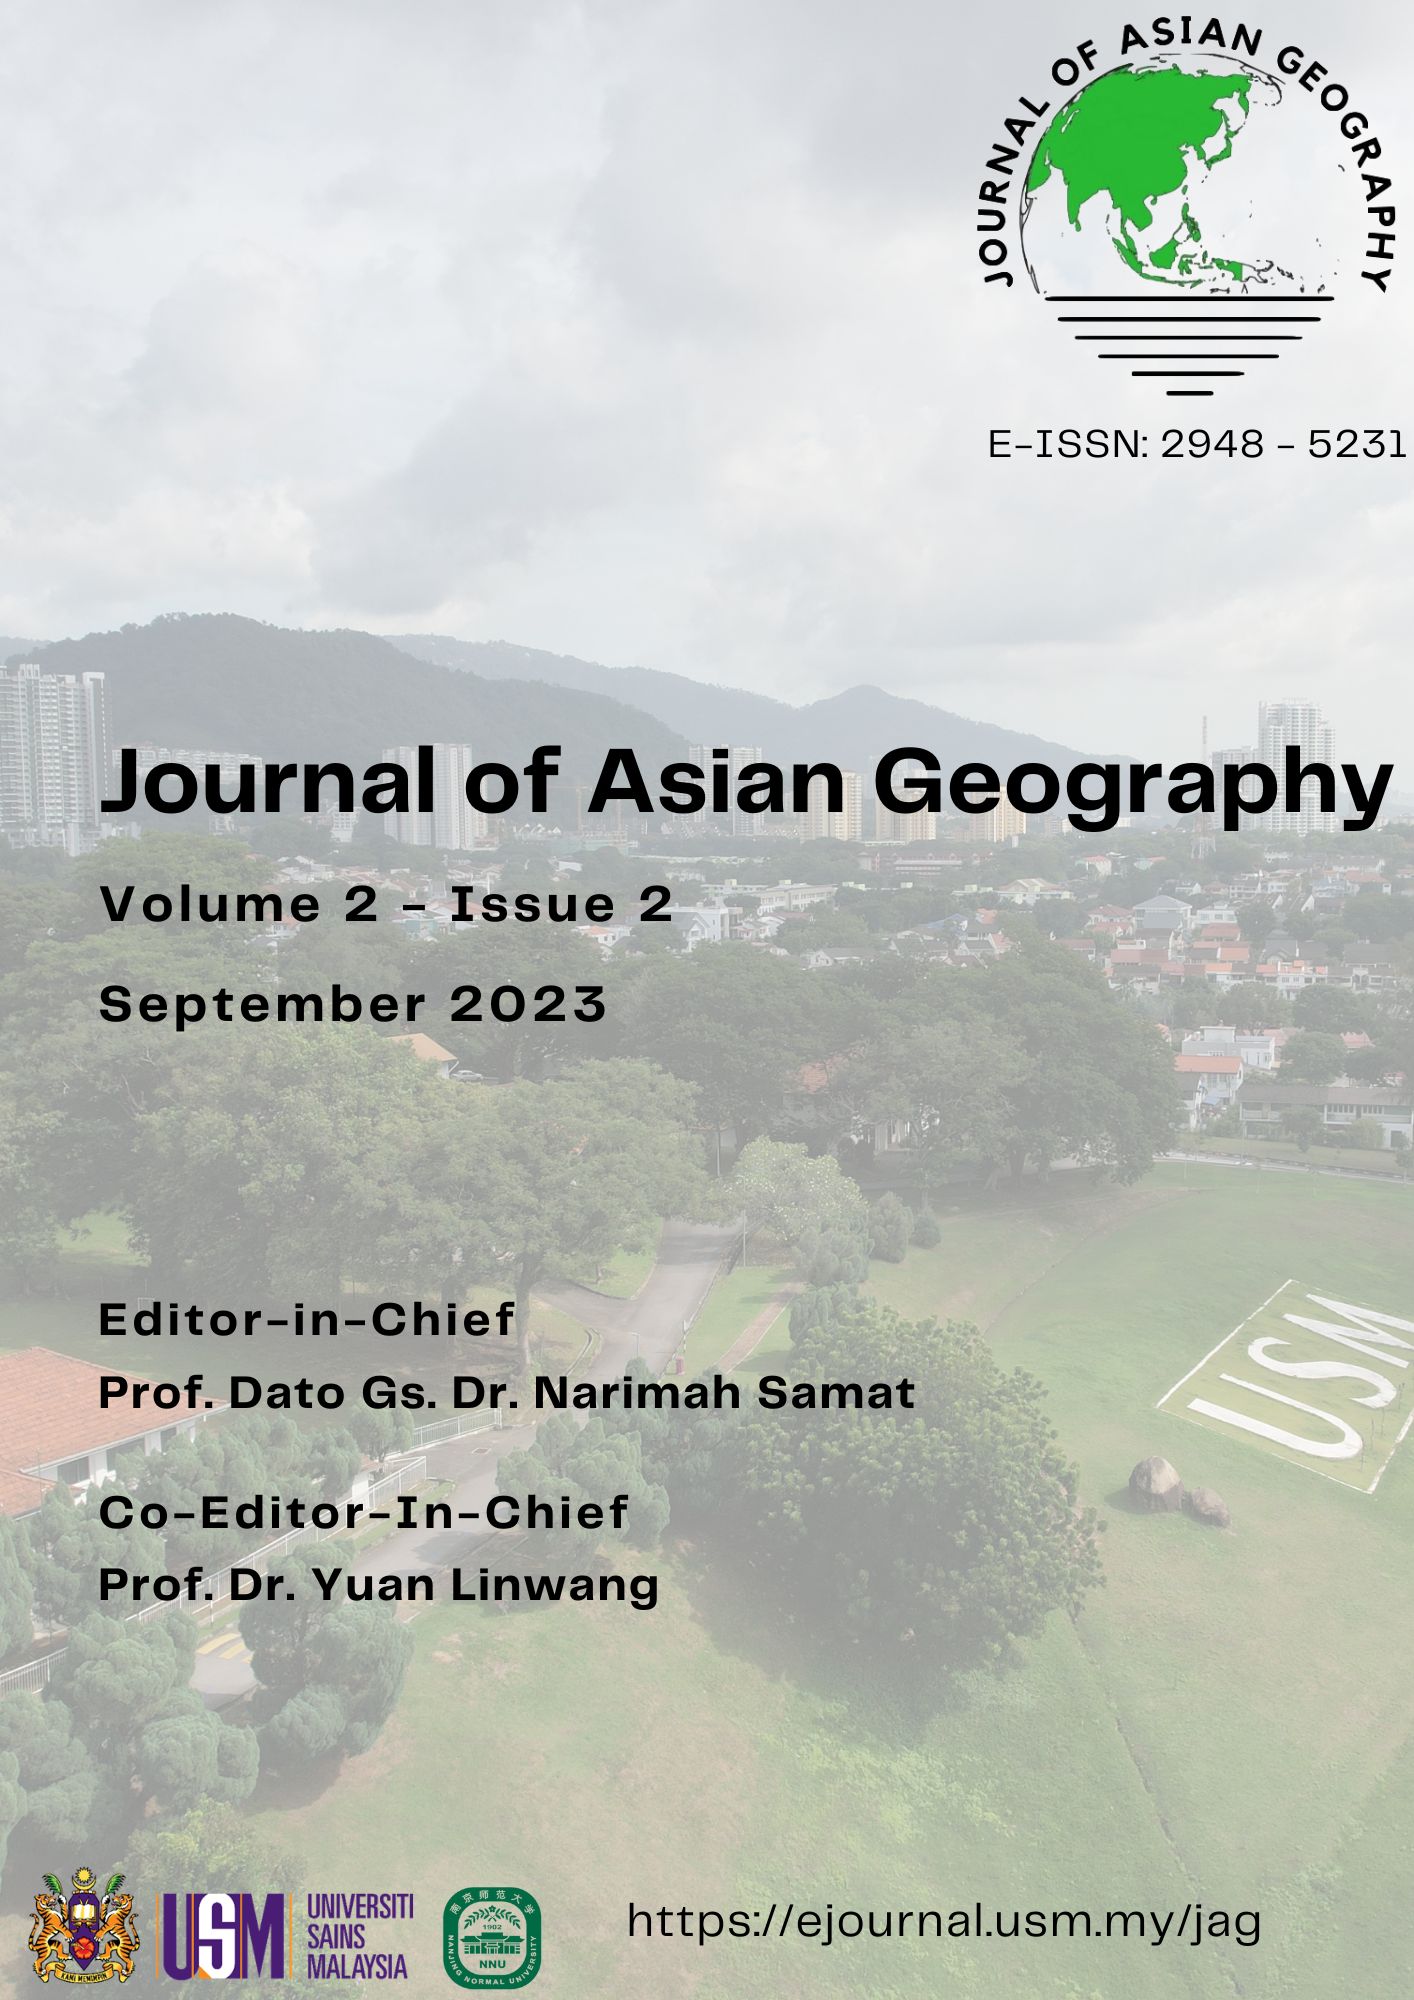 					View Vol. 2 No. 2 (2023): Volume 2 Issue 2 - September 2023
				